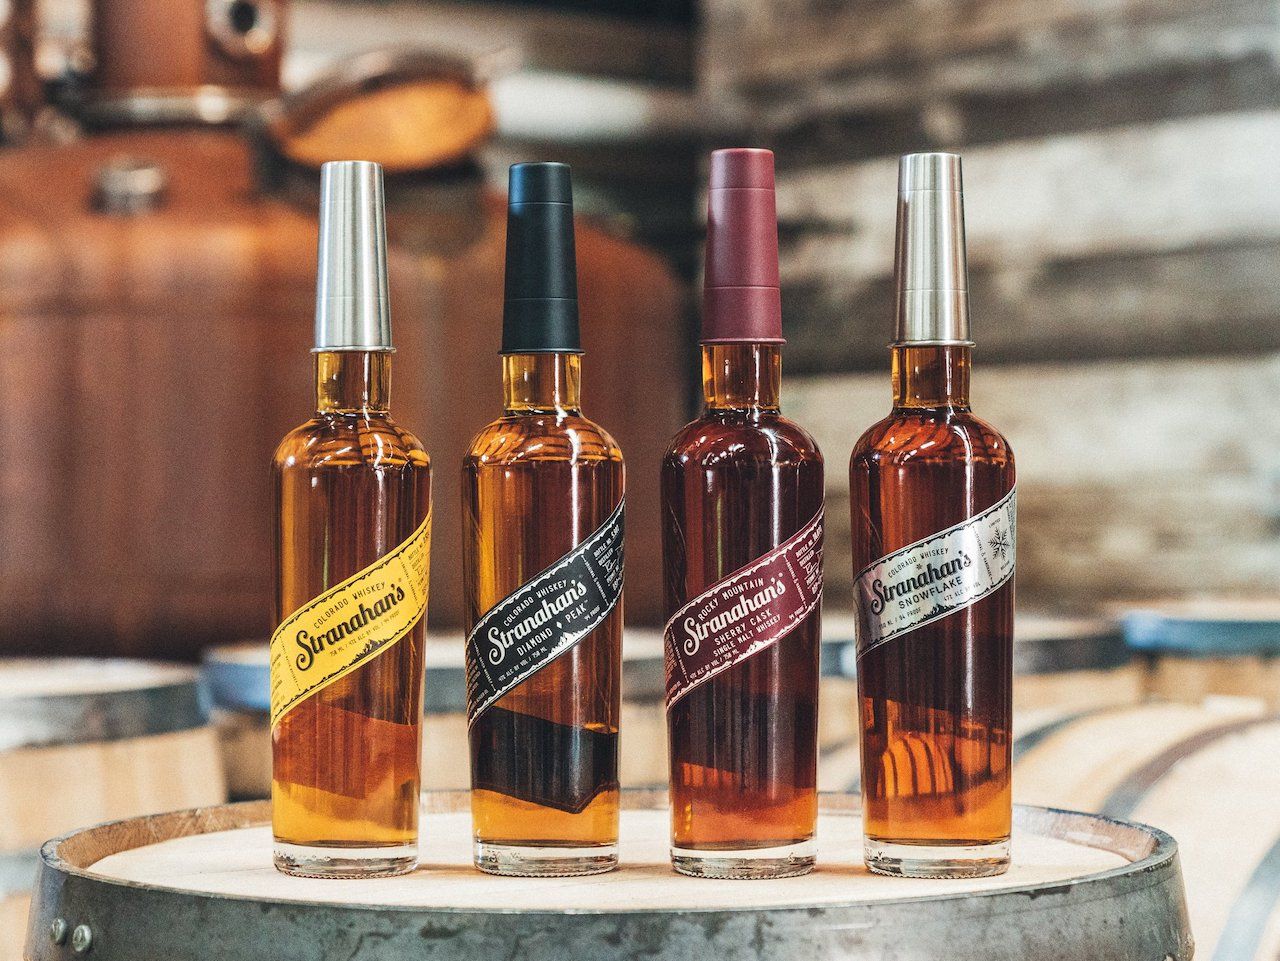 Four bottles of Stranahan's Colorado Whiskey